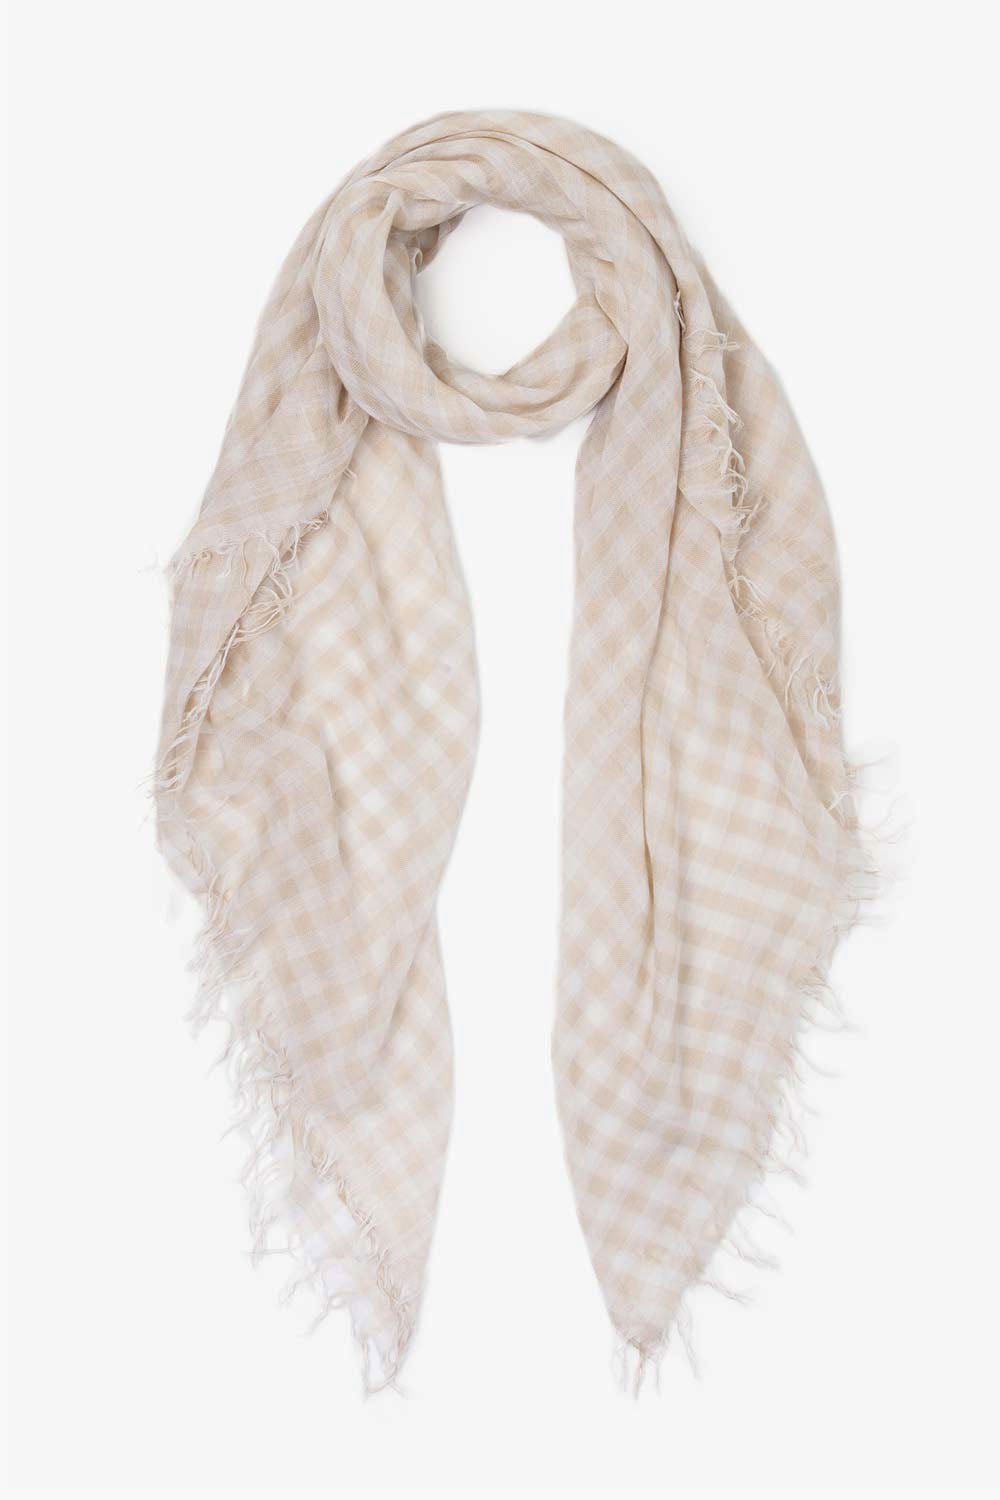 Chan Luu Cashmere and Silk Scarf Wrap - Gingham Moonlight White BRH-SC-441